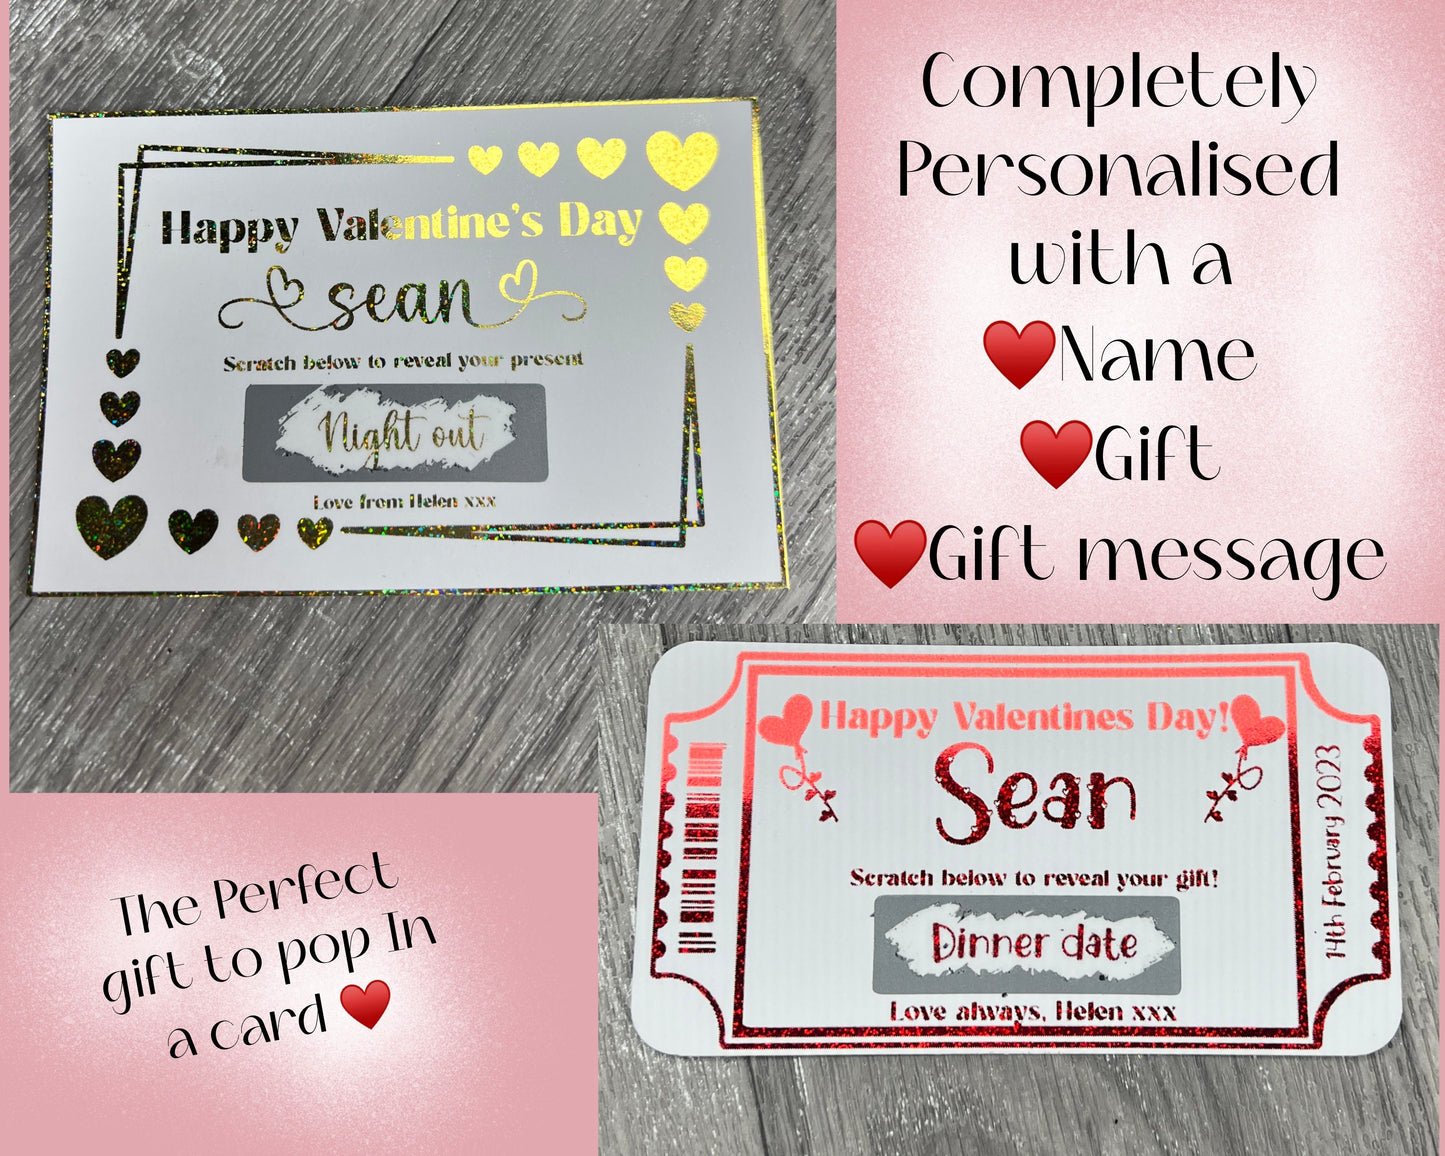 Valentine’s Day gifting scratch card